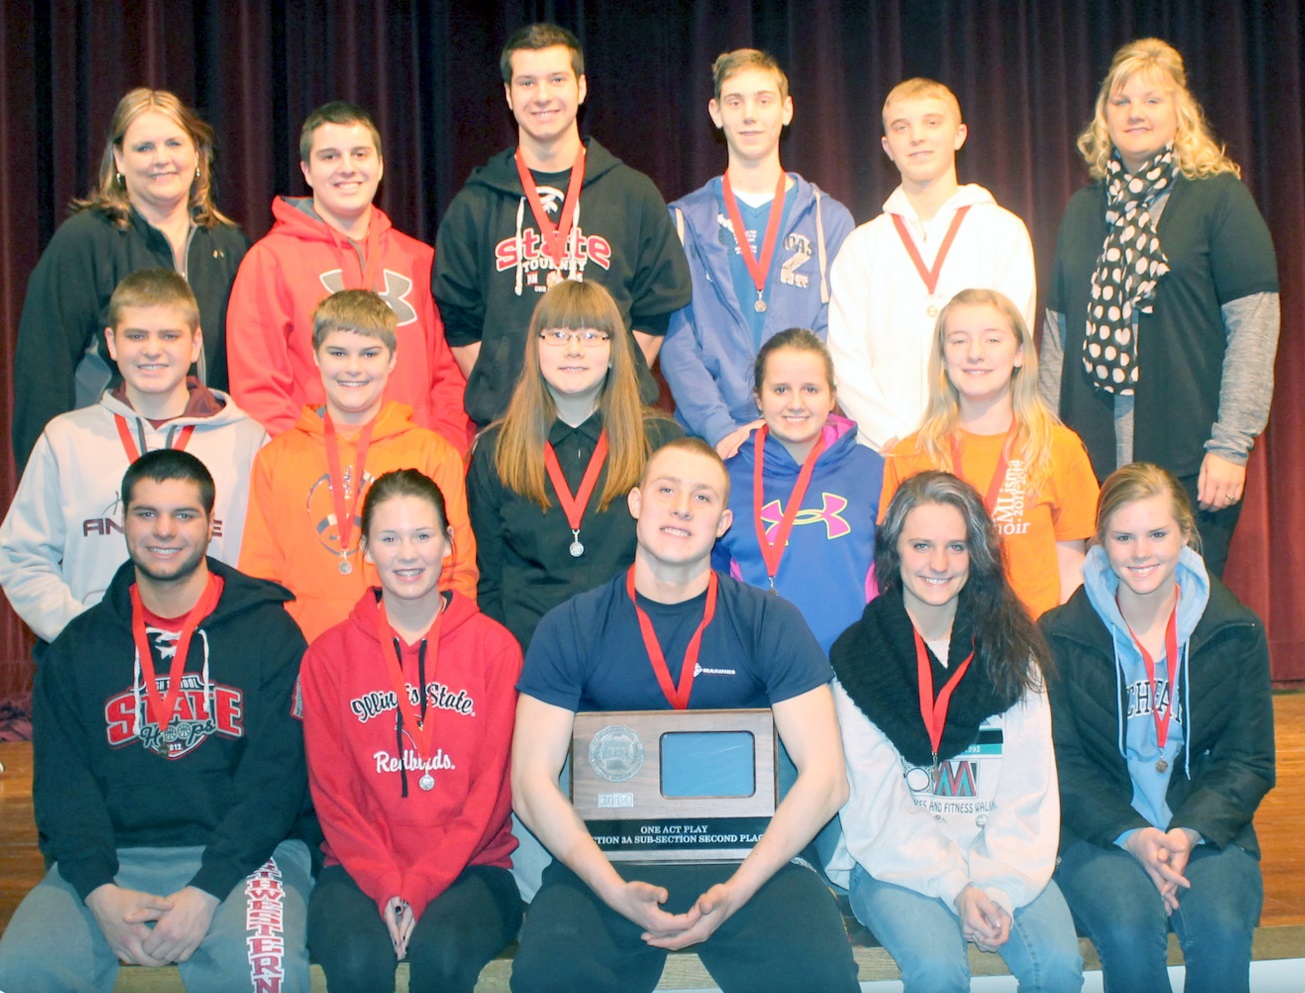 SUB-SECTION 9A One-Act Play Festival runners-up - Mountain Lake Public High School with "Livin' de Life." Front, from left, Joshua Grev, Olivia Hopwood, Zach Fredericksen, Lydia Hildebrandt and Carmen Syverson. Middle, from left, Sam Grev, Regan Syverson, Jareya Harder, Kallely Rempel and Rebekah Klassen. Back, from left, Director Julie Brugman, Caleb Rempel, Ben Grev, Julian Jung, Austin Wallert and Assistant Director Crystal Fast.